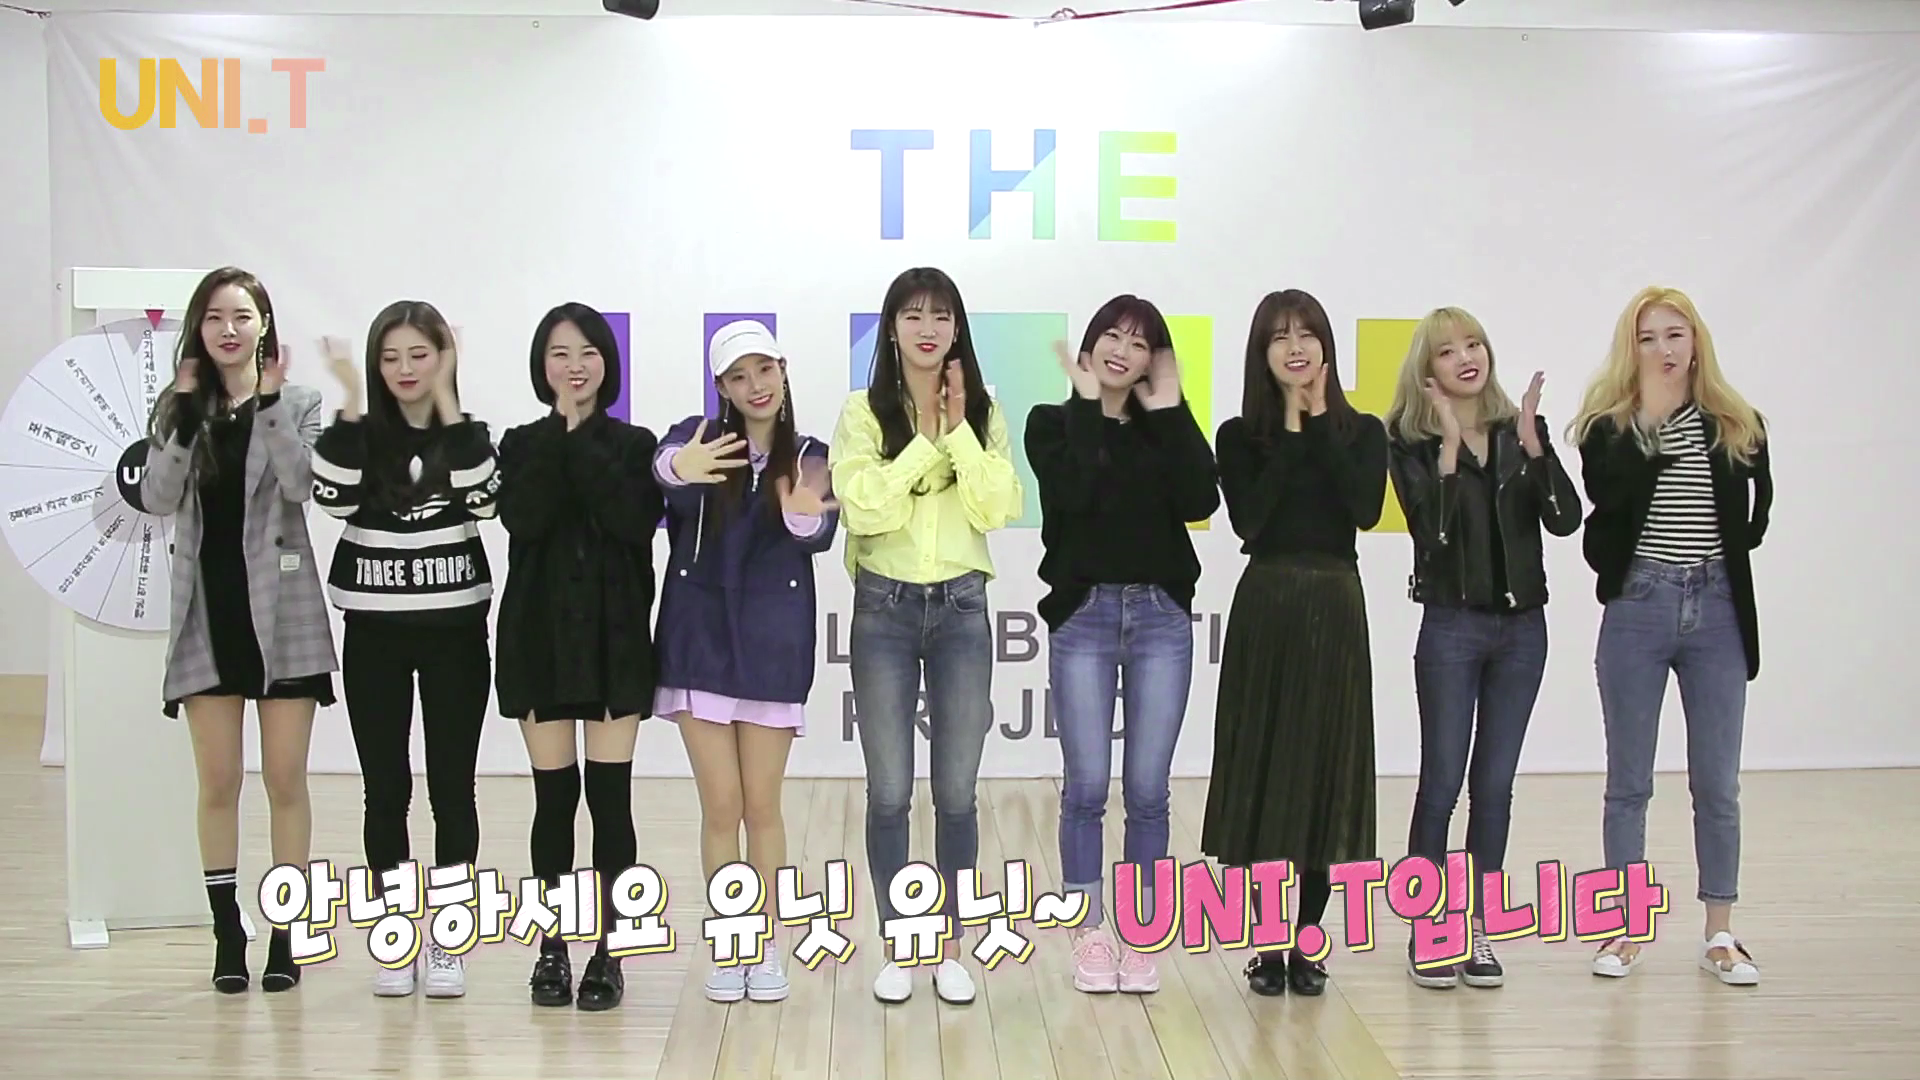 UNI.T THANKS TO FANMEETING VCR-Reality